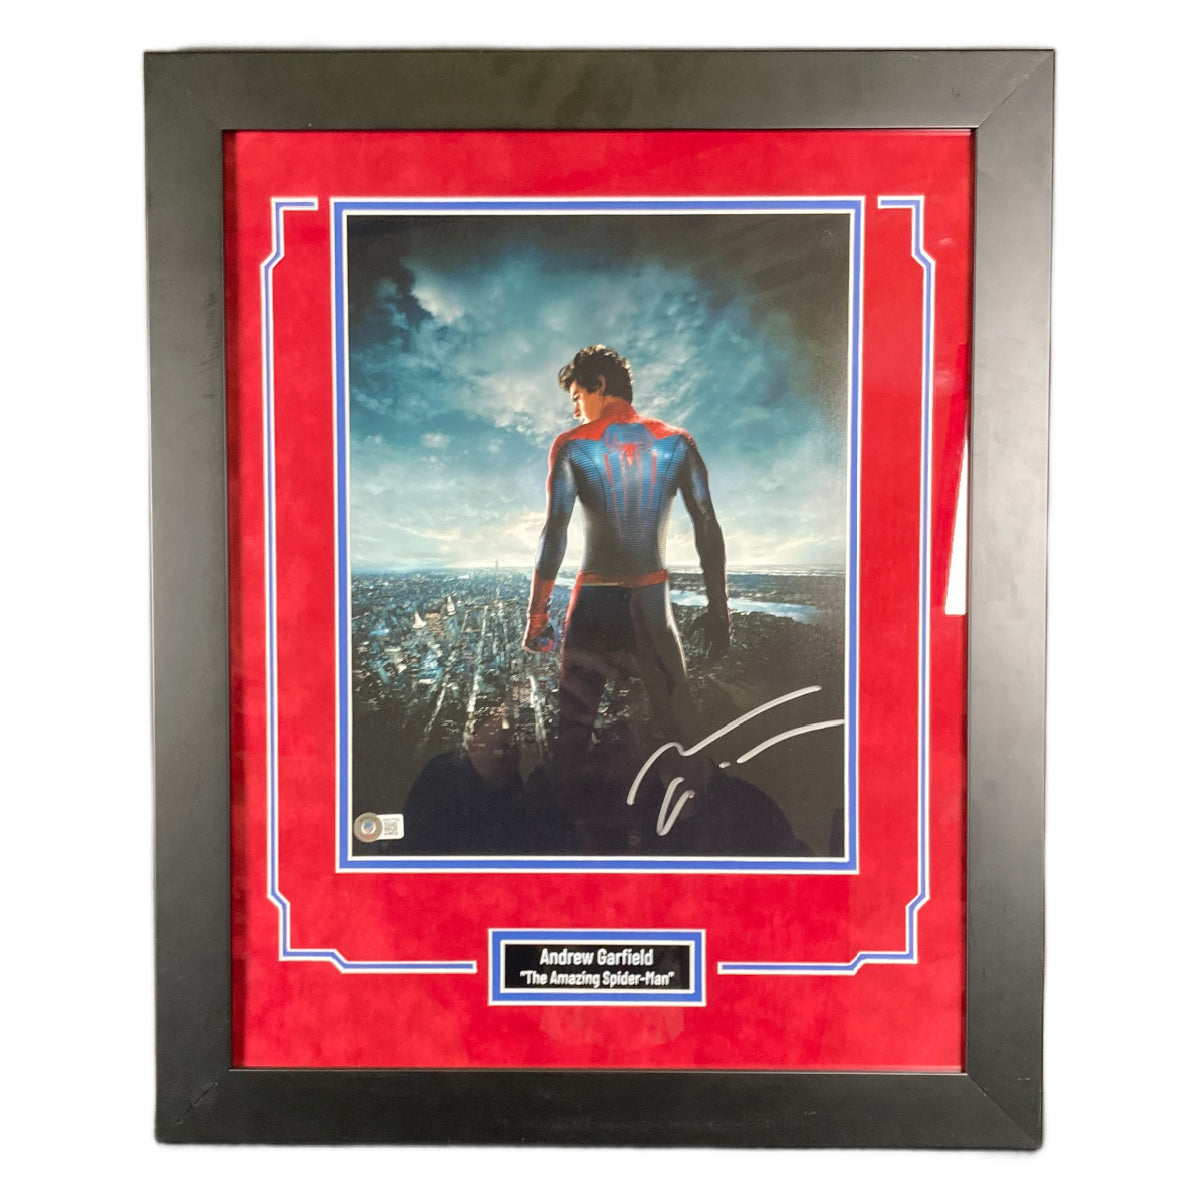 Andre Garfield Signed 11x14 Photo Custom Framed The Amazing Spider-Man Autographed JSA COA